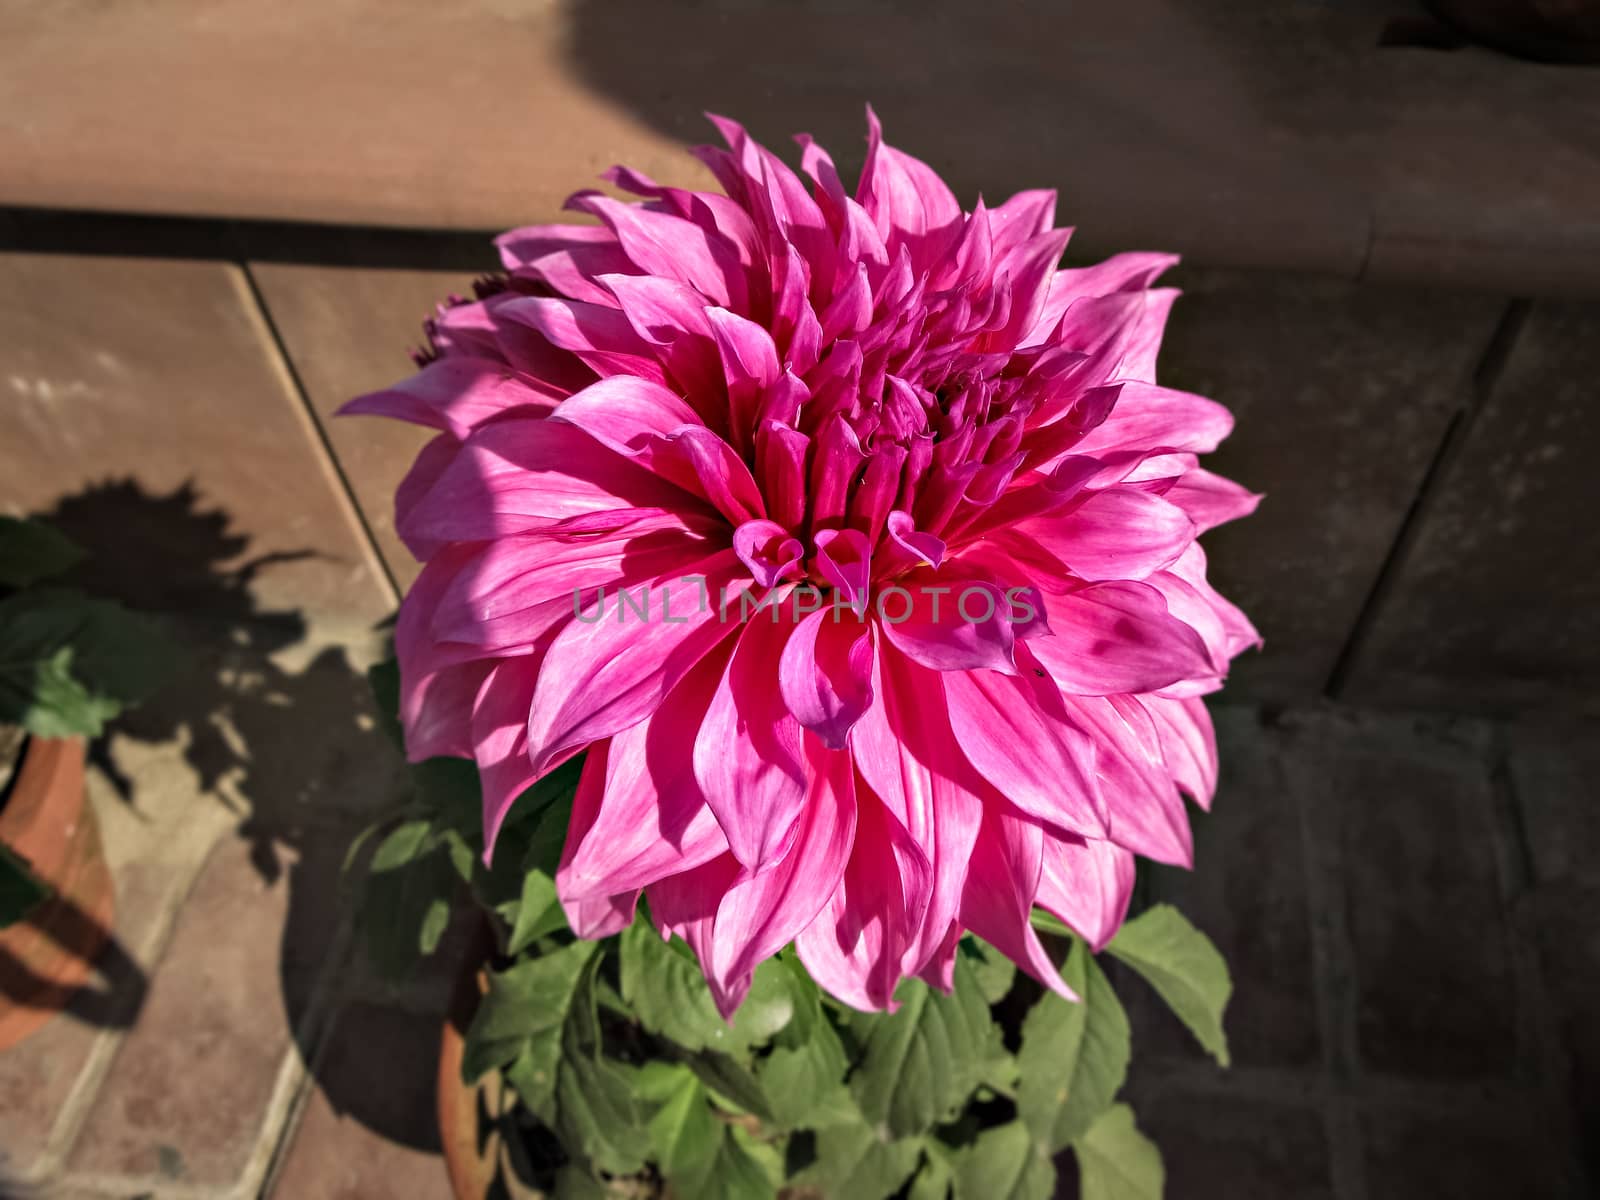 Selective focus, blur background, close up image of bright pink Dahlia flower in park.